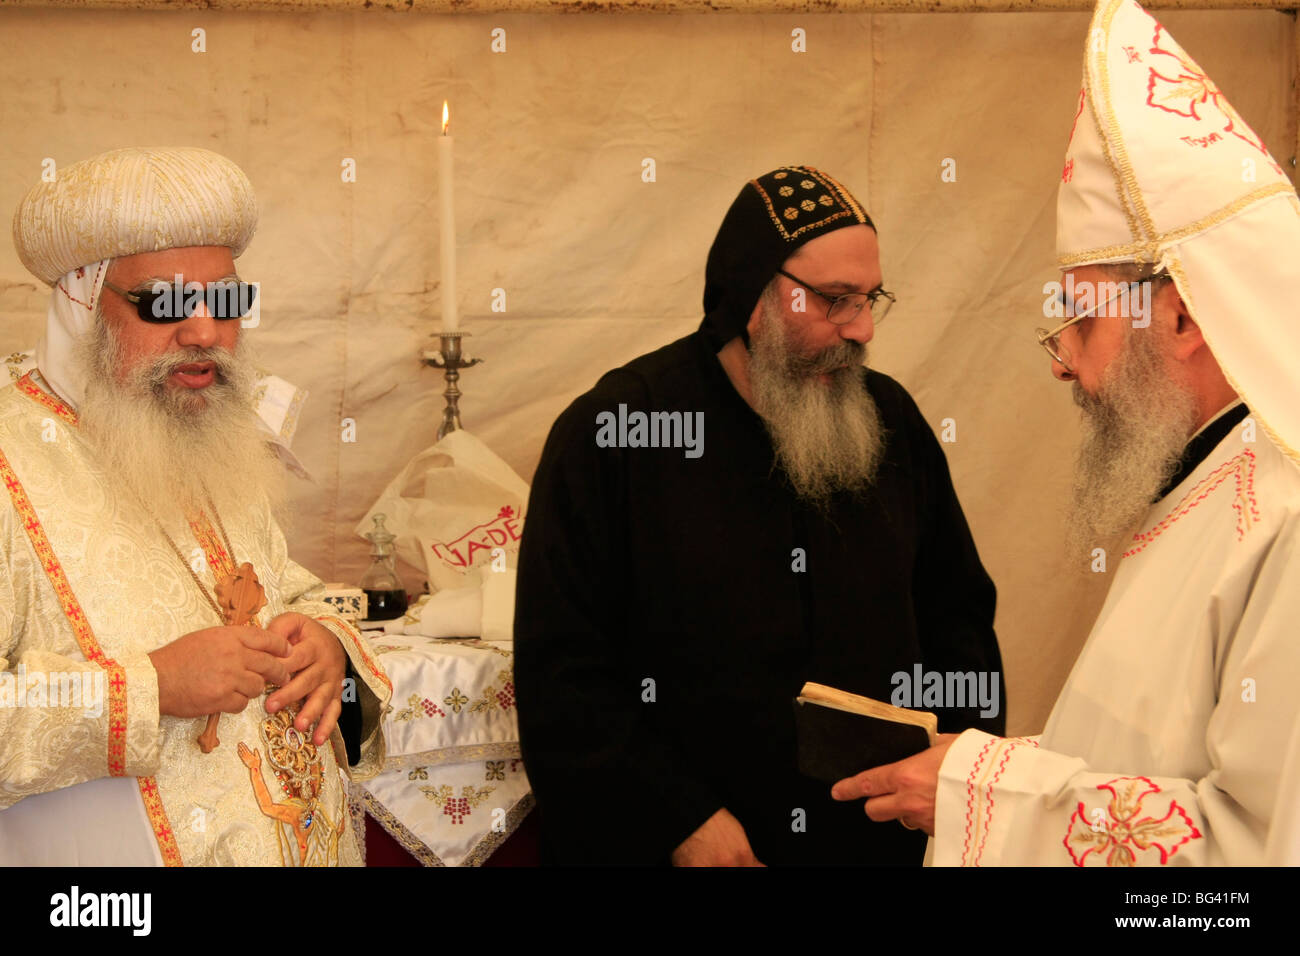 Israel, Jerusalem, Coptic Orthodox Ascension Day ceremony at the Ascension Chapel on the Mount of Olives Stock Photo